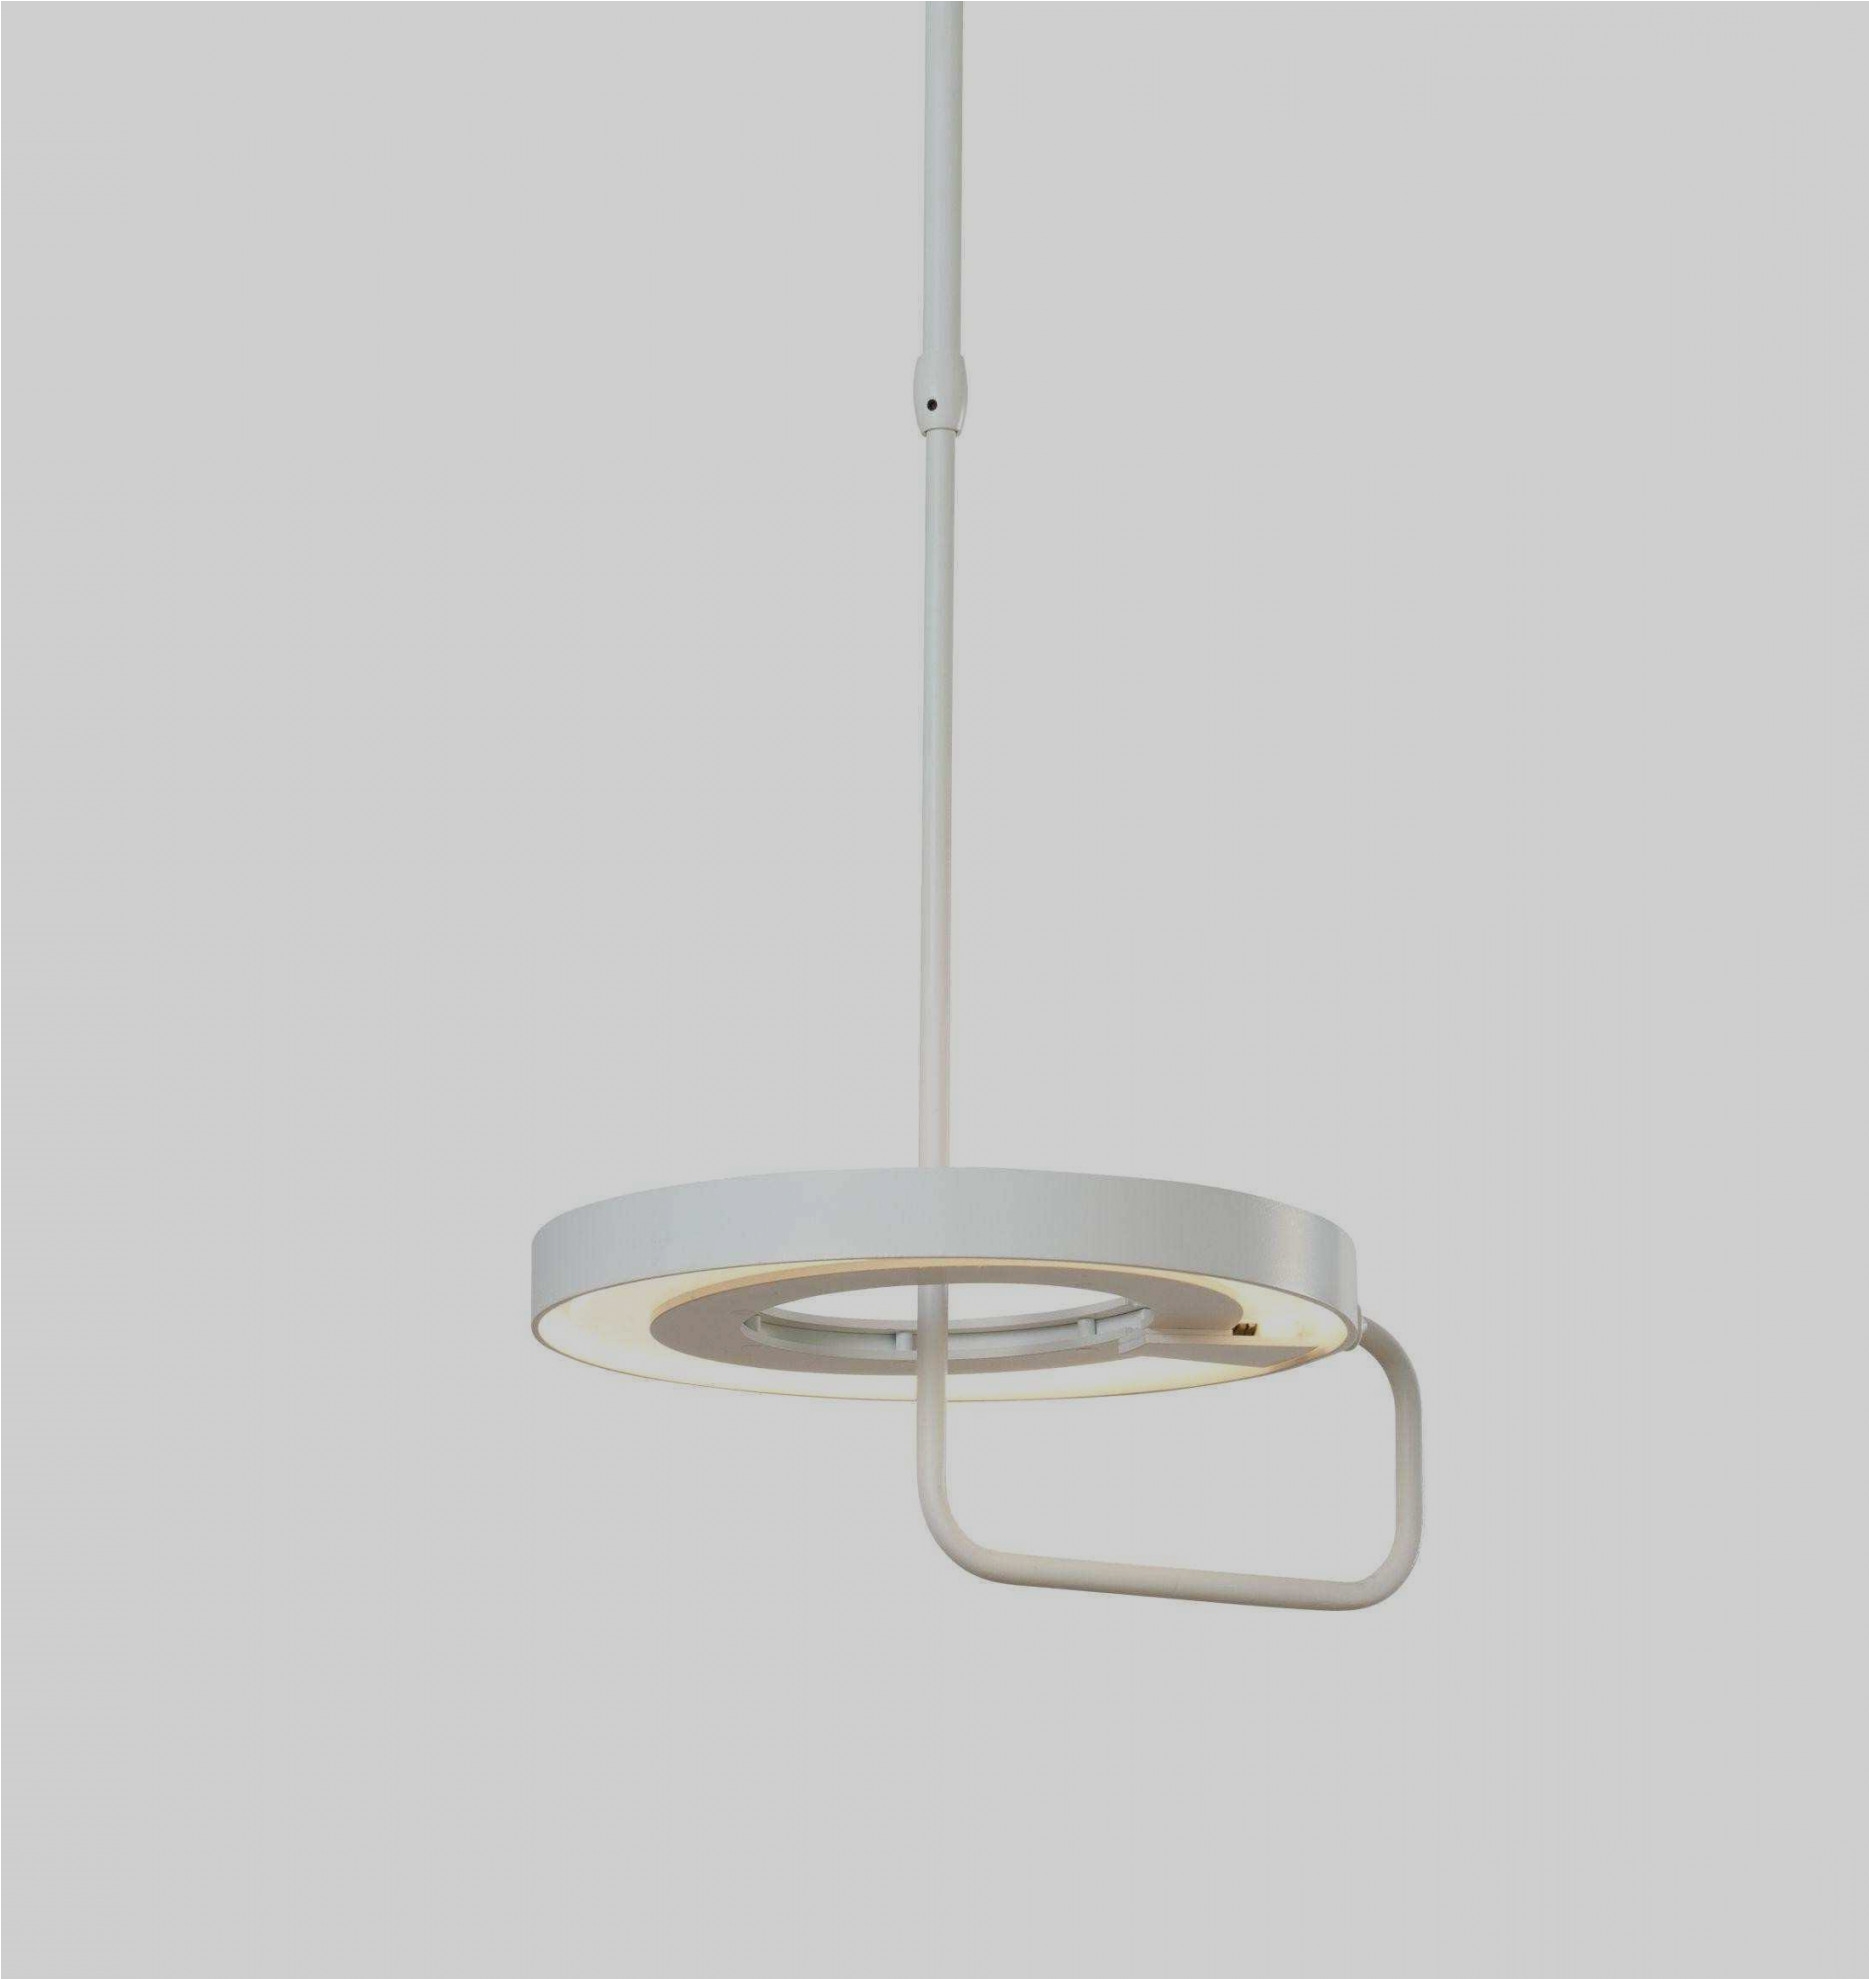 awesome white pendant light fixture